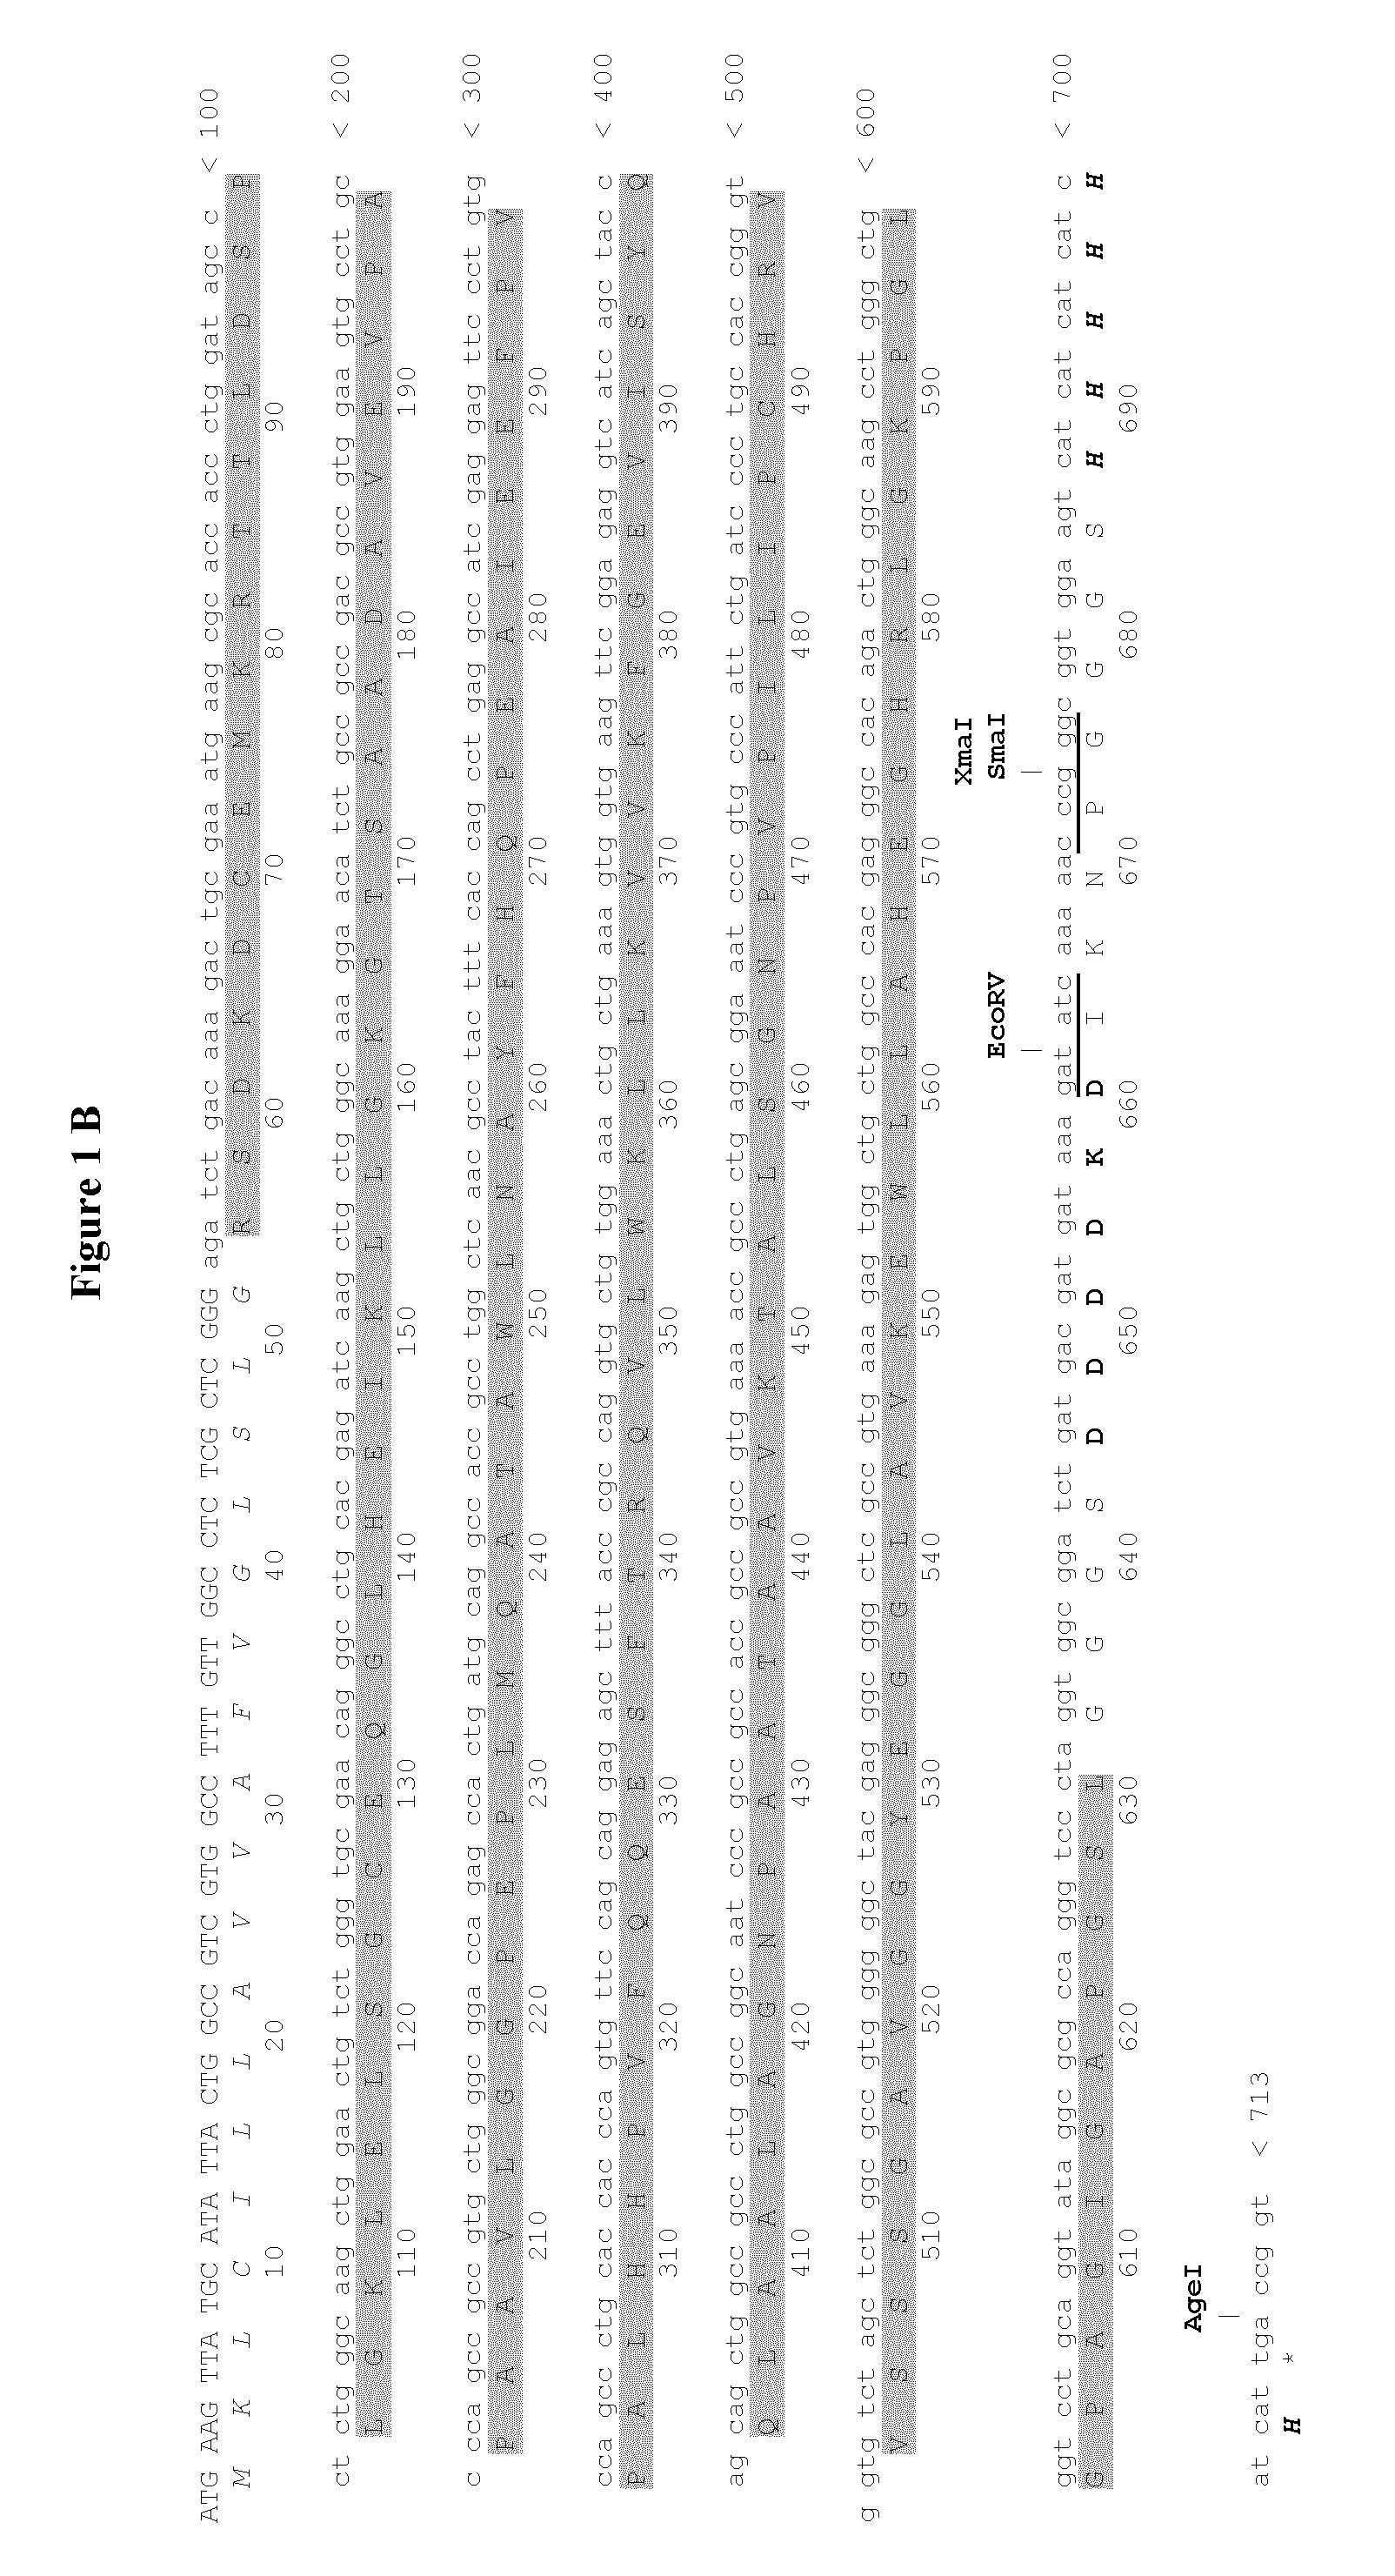 MGMT-based method for obtaining high yields of recombinant protein expression